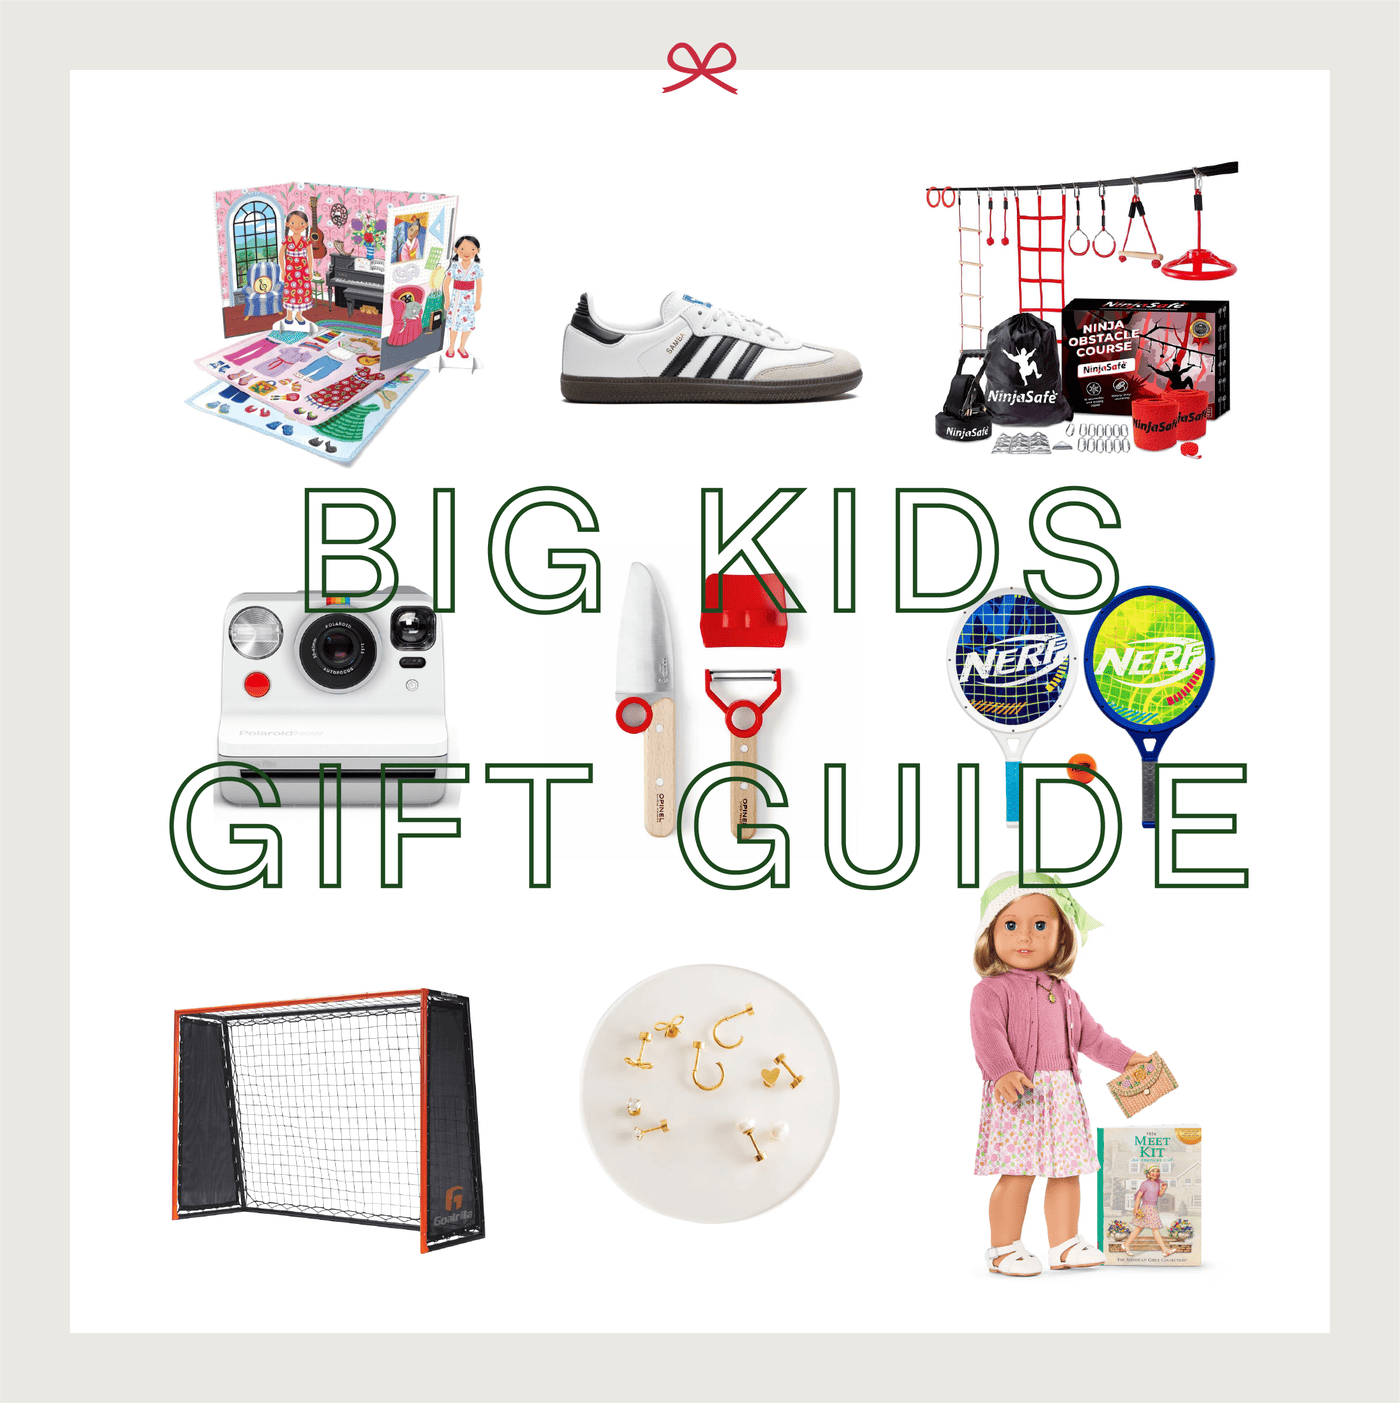 Big Kids Holiday Gift Guide - The Buy Guide